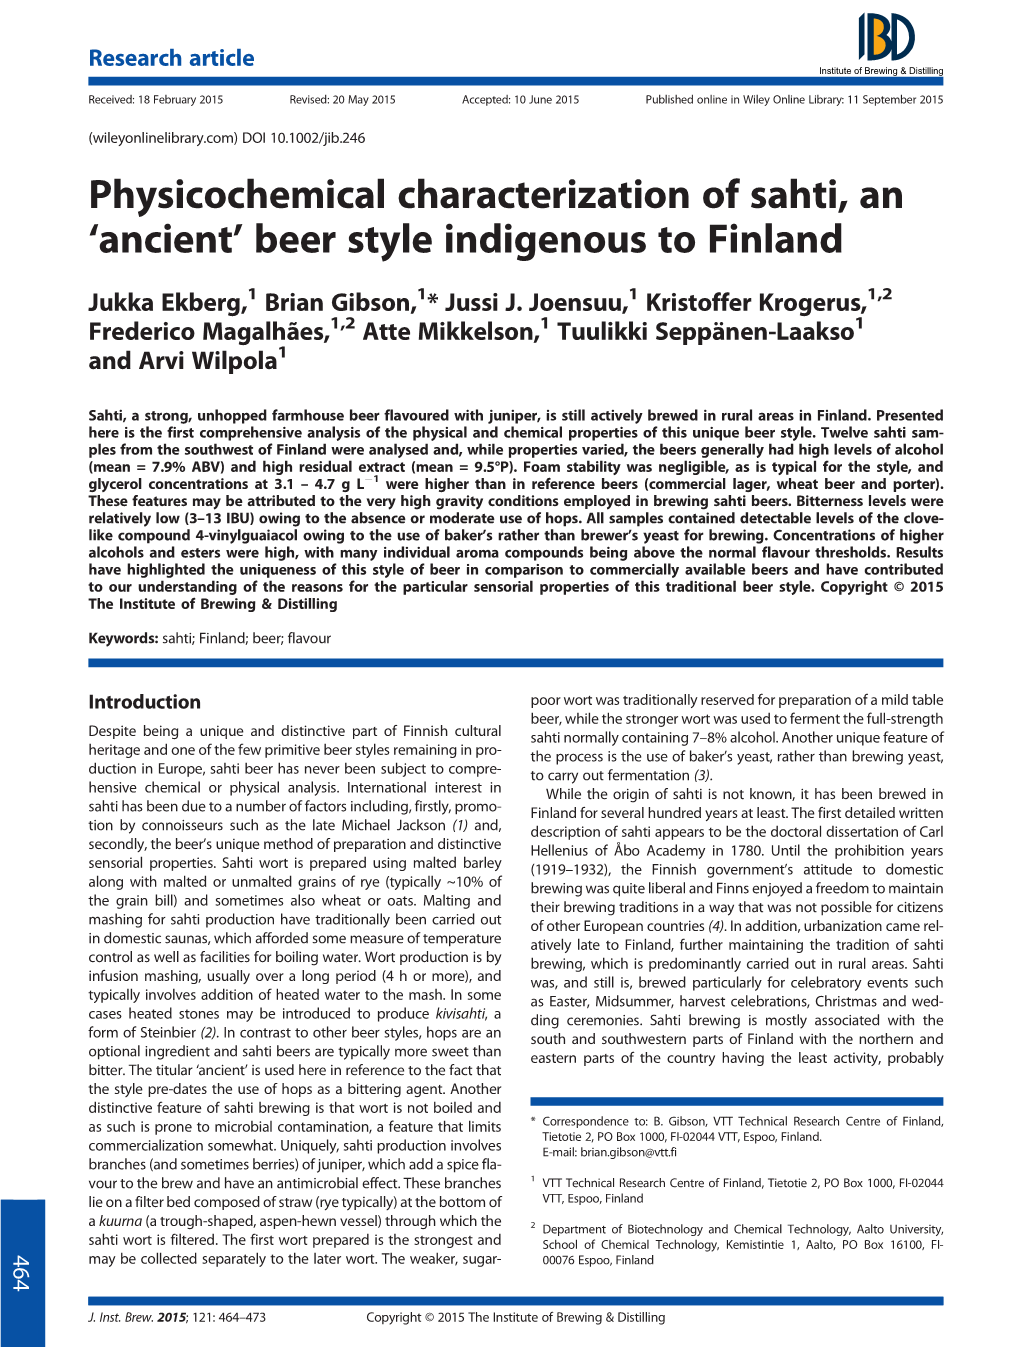 Physicochemical Characterization of Sahti, an 'Ancient' Beer Style